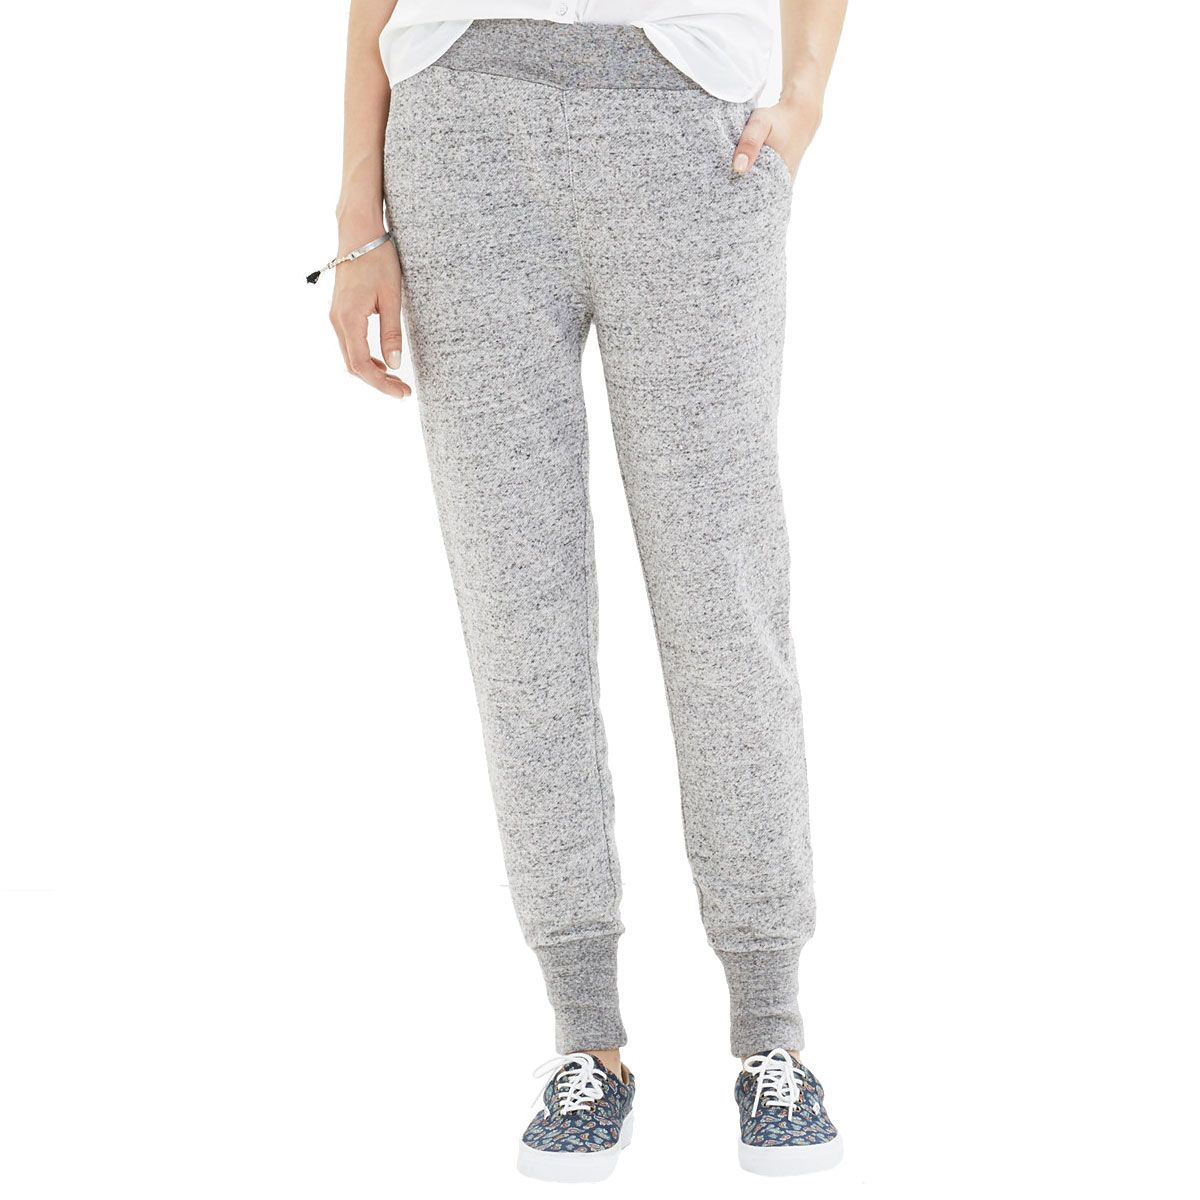 Madewell Sweatpants - 18 Stylish Basics to Buy on Sale Right Now - The Cut